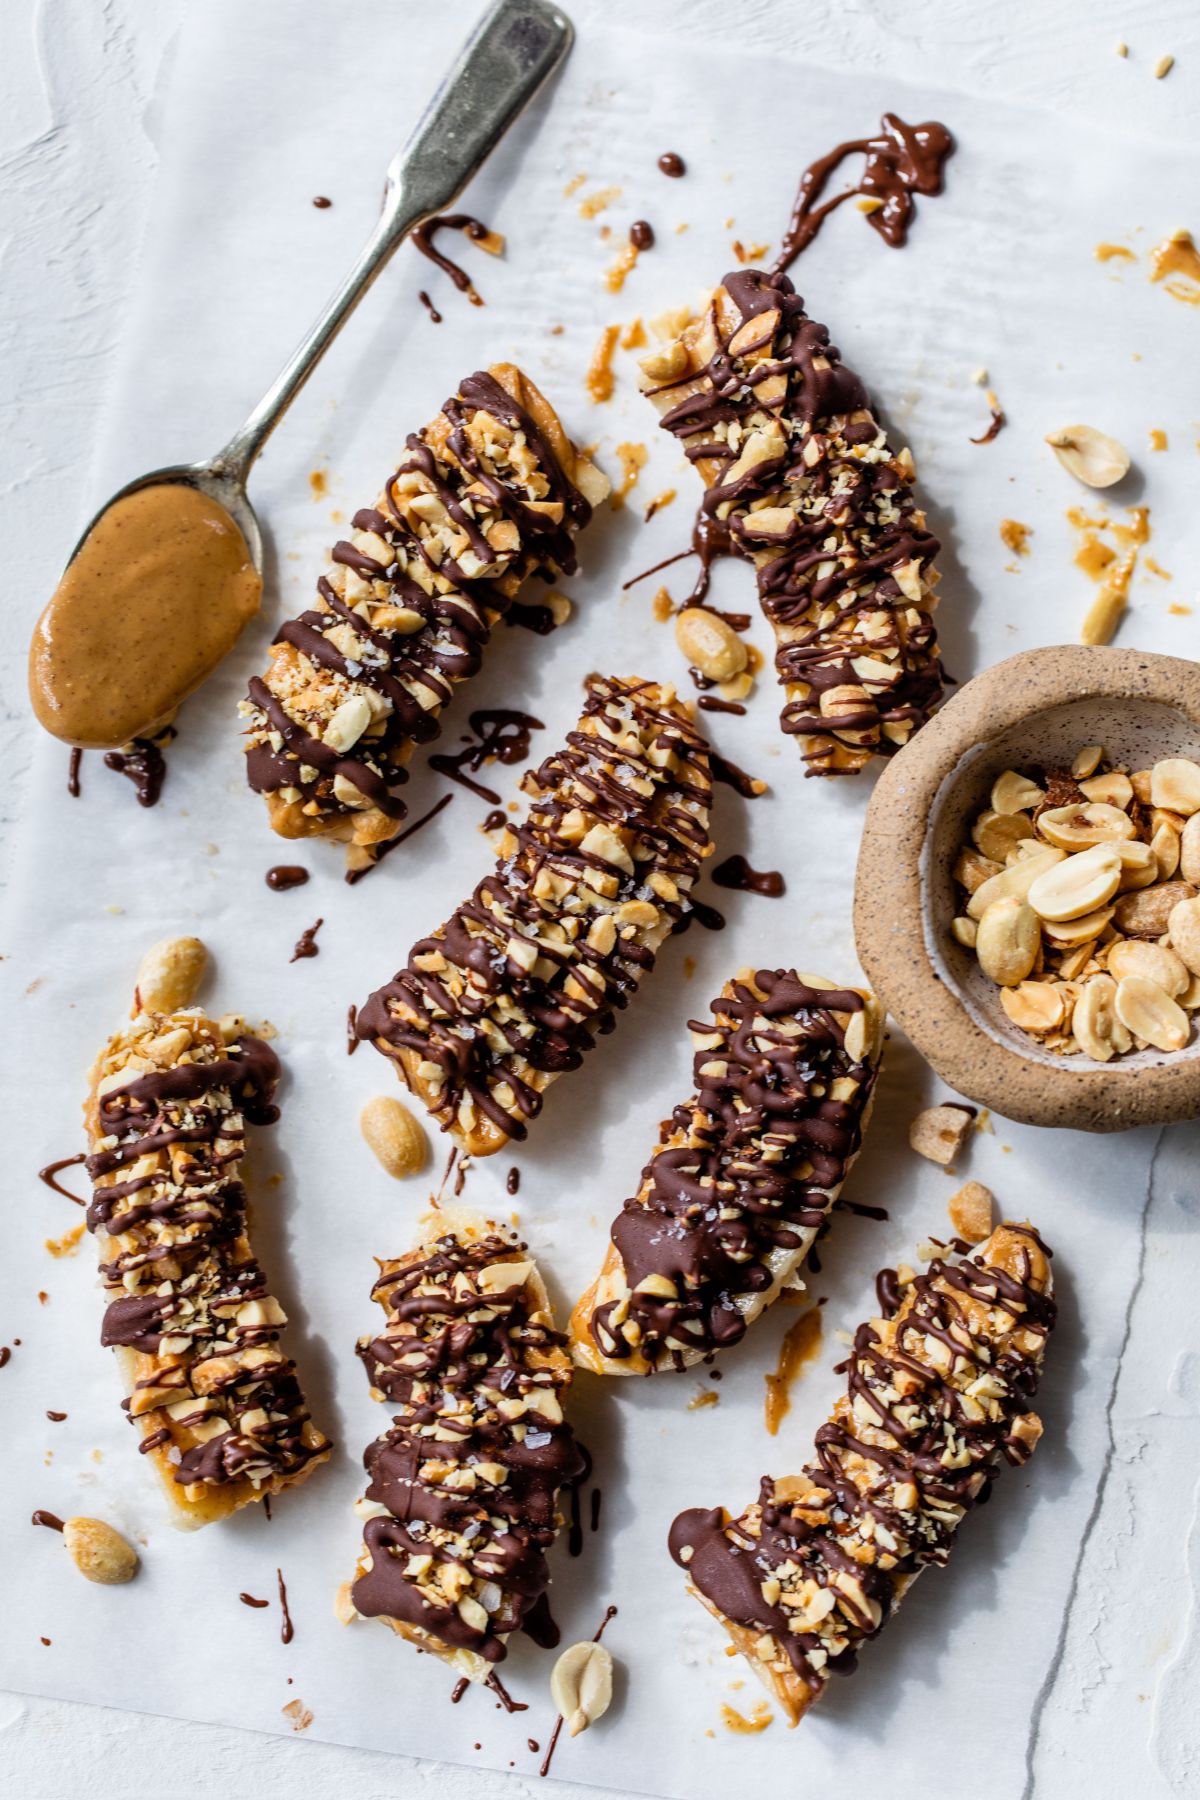 Pieces of banana drizzled with peanut butter and chocolate.